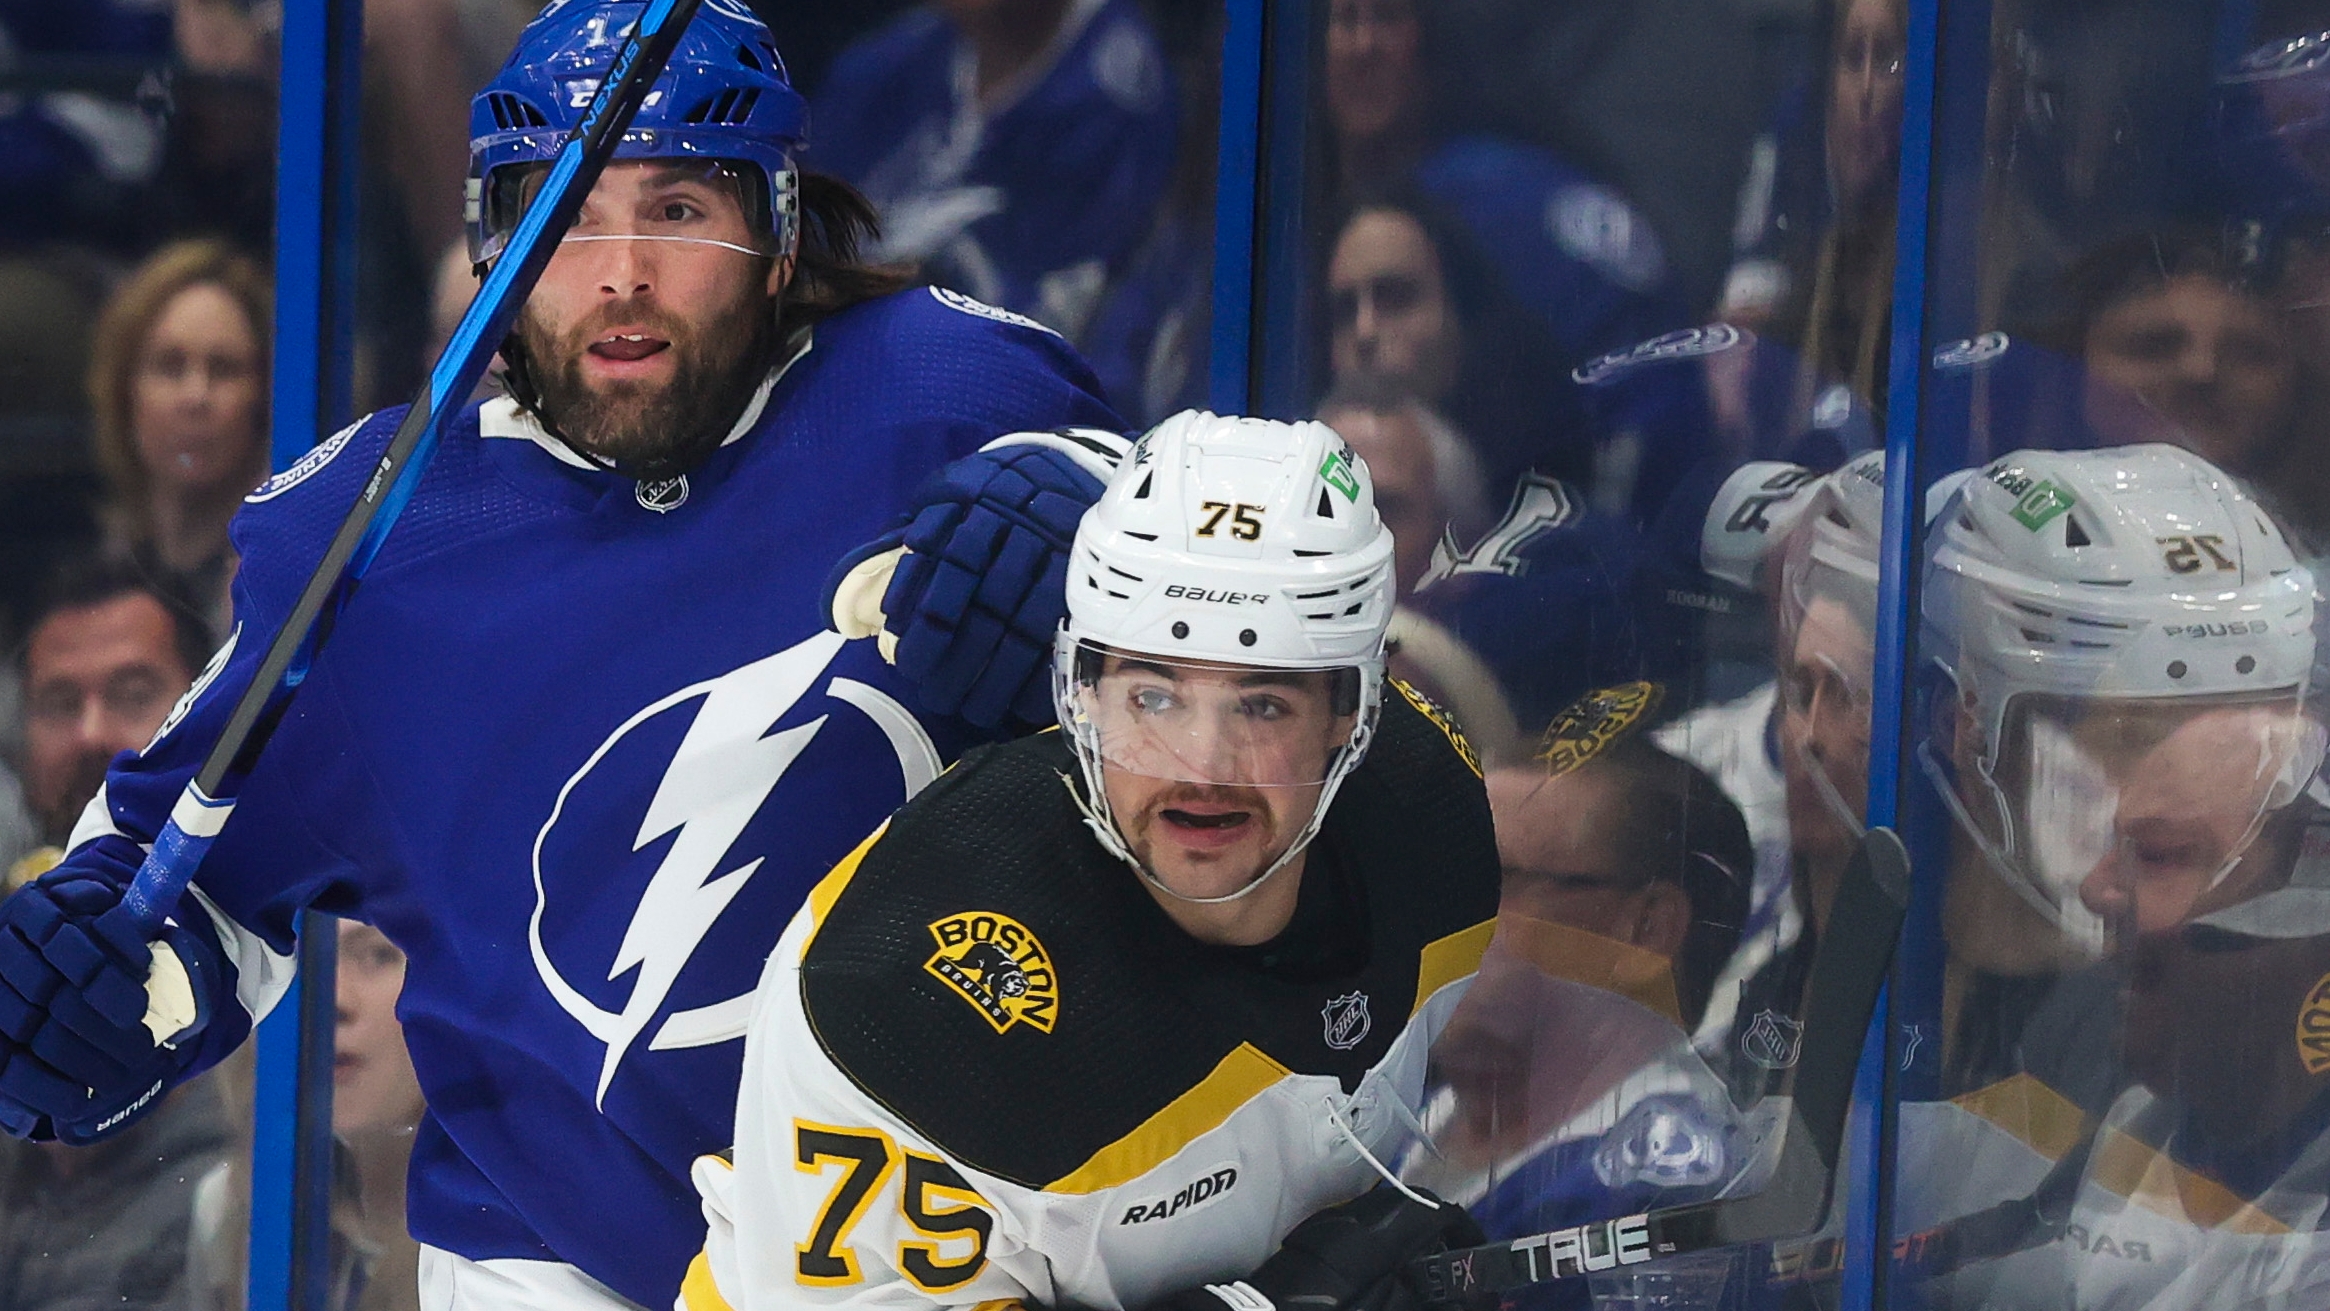 Bruins broadcaster Jack Edwards jokes on-air about Pat Maroon's weight